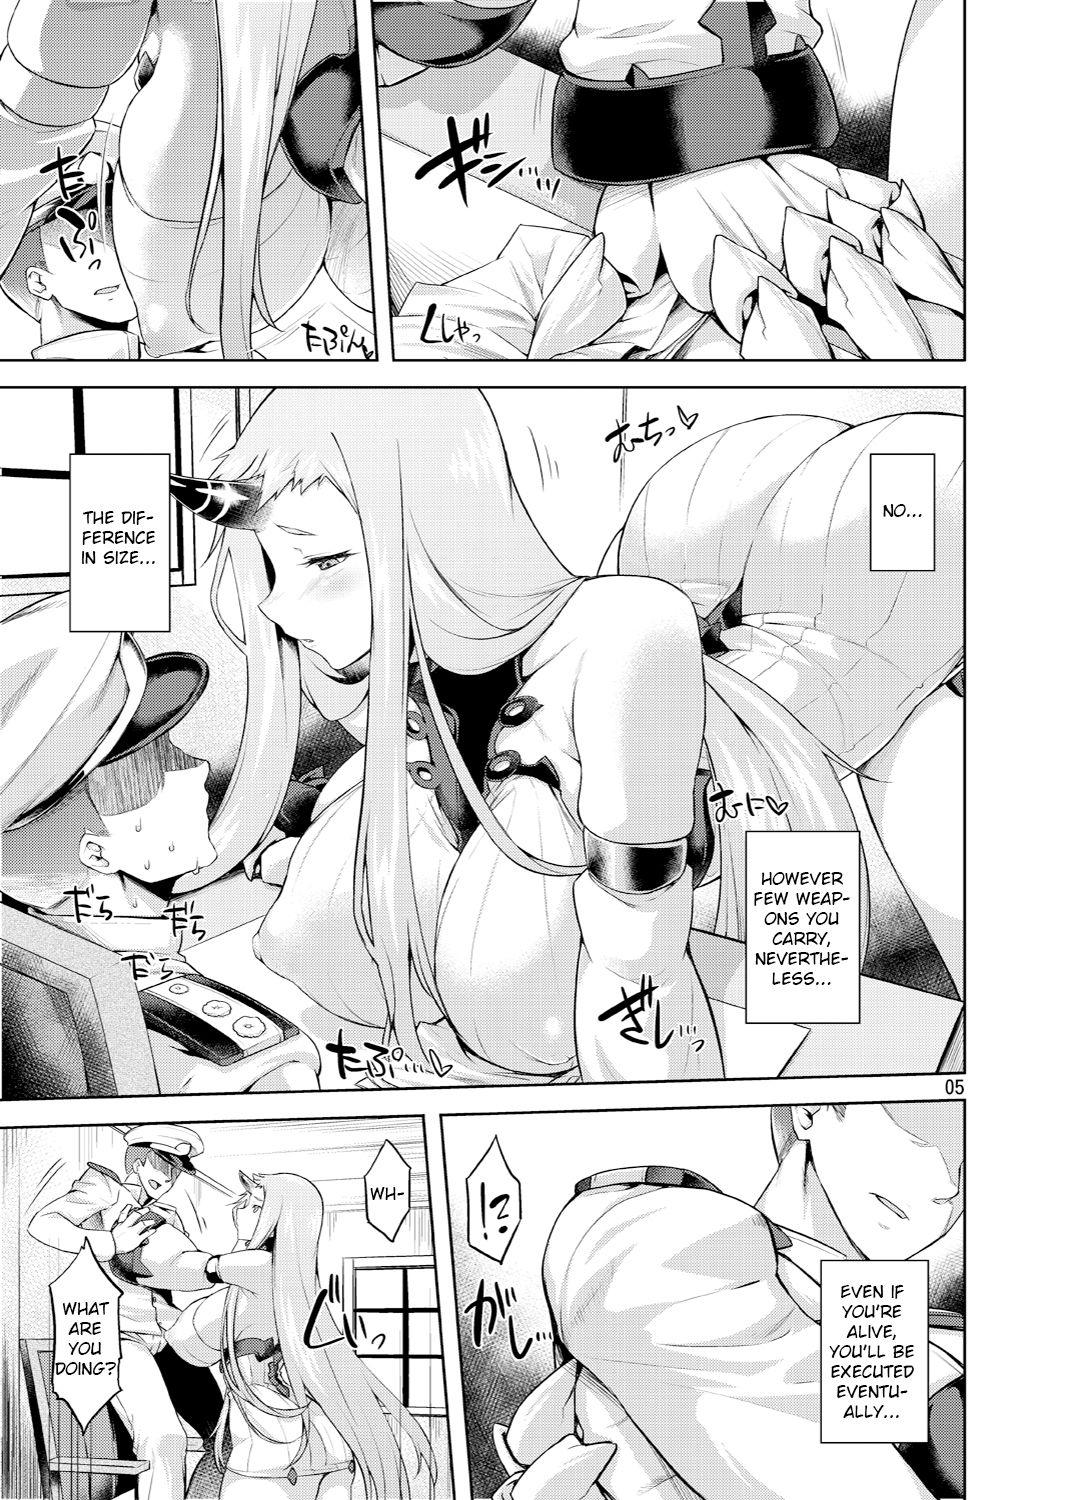 Nice Tits Yuukouteki na Shoutai Fumei no Sonzai 2 | Amicable Unseen Entity 2 - Kantai collection Missionary Position Porn - Page 4